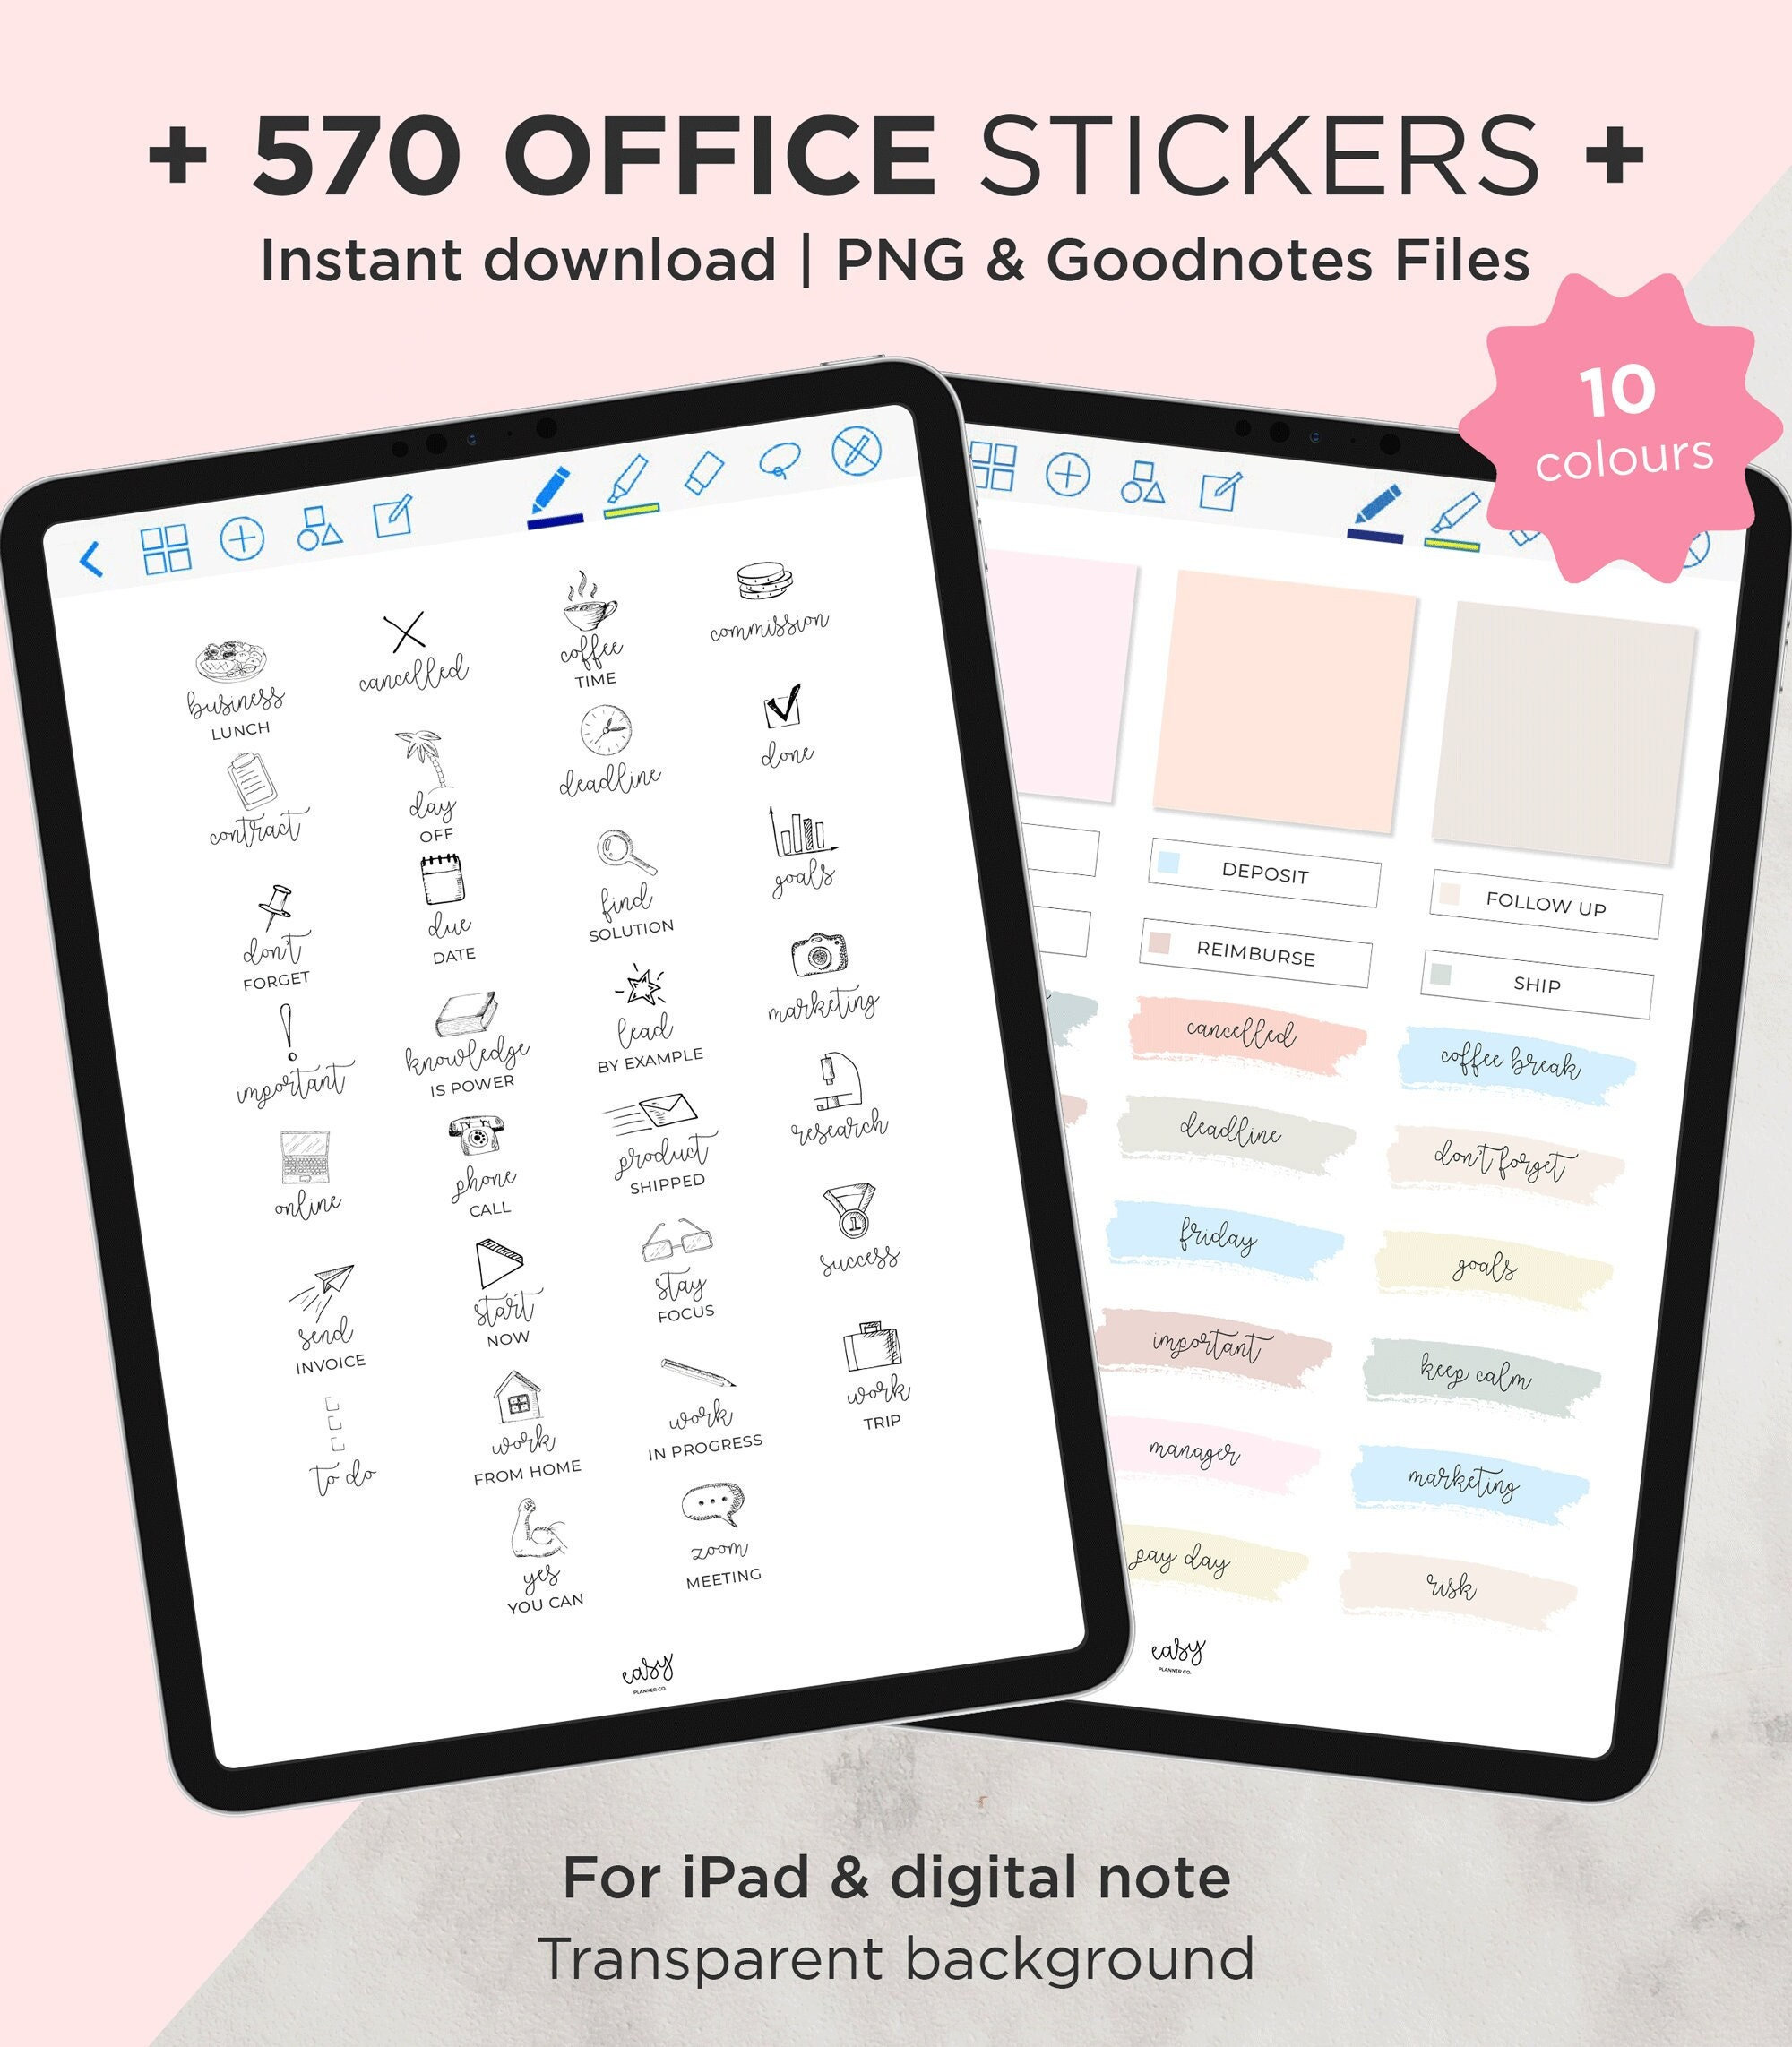 Free Digital Stickers for GoodNotes, Feel free to download with